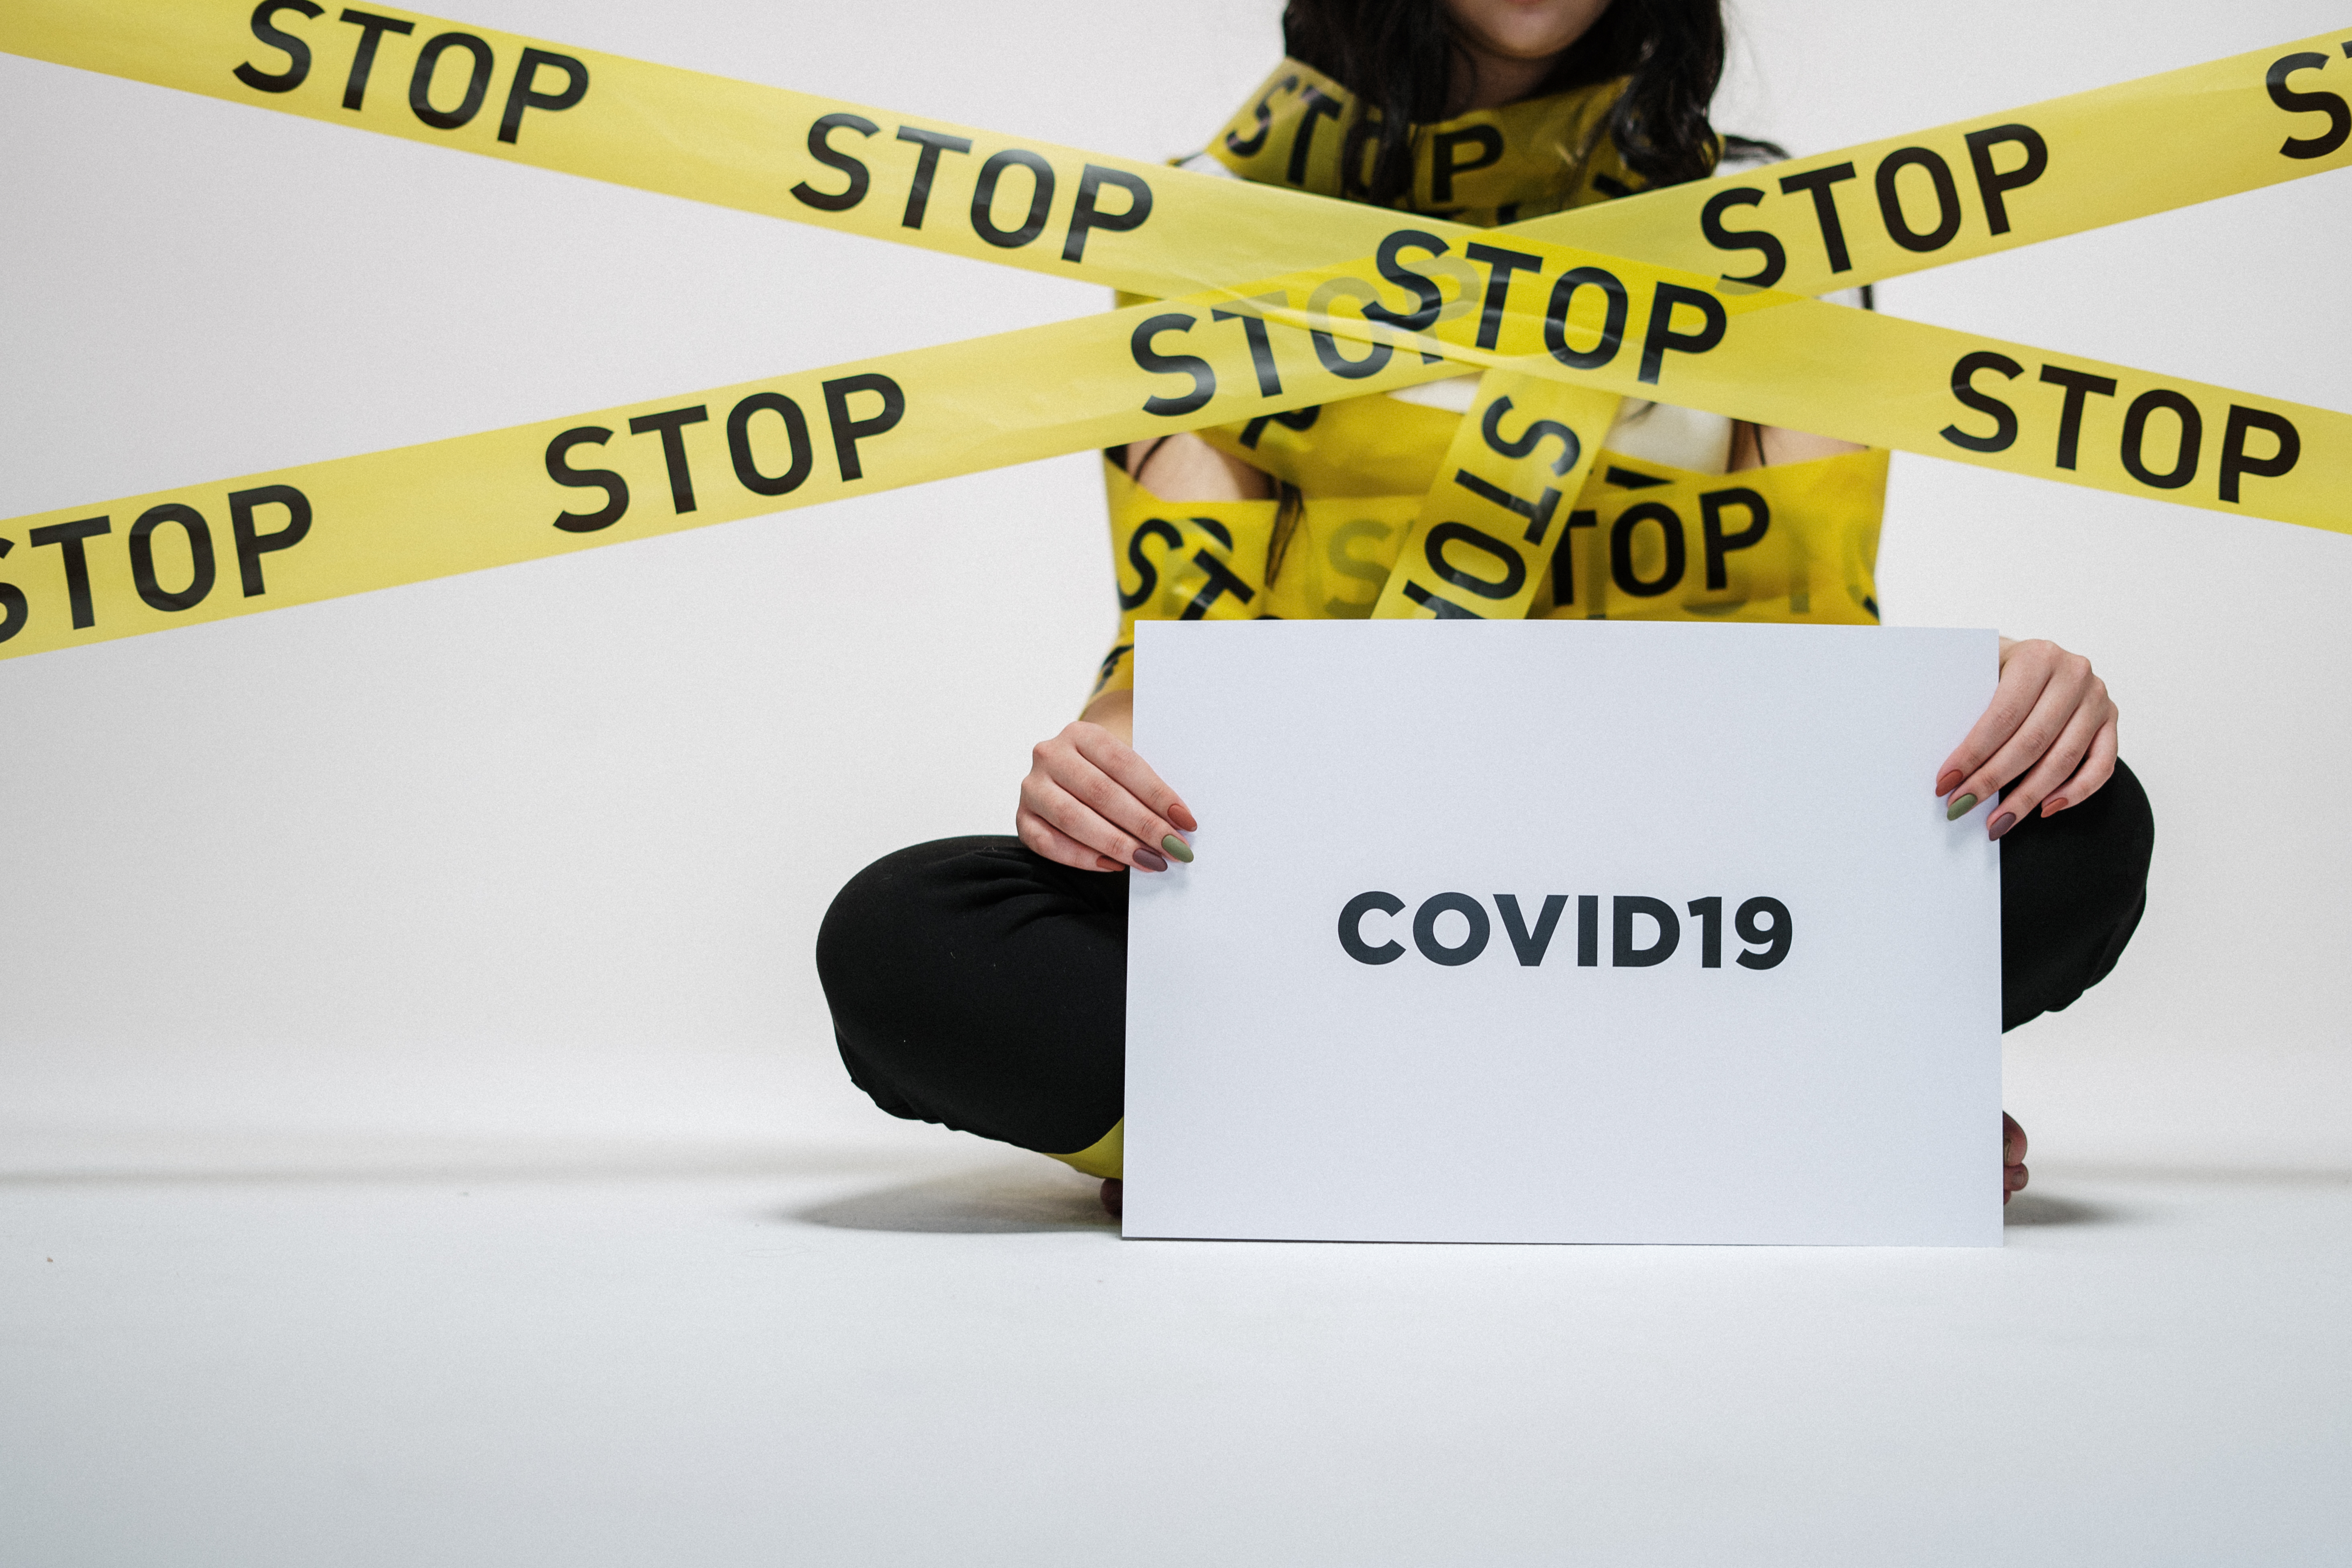 3 ways to keep your home safe and free from COVID-19